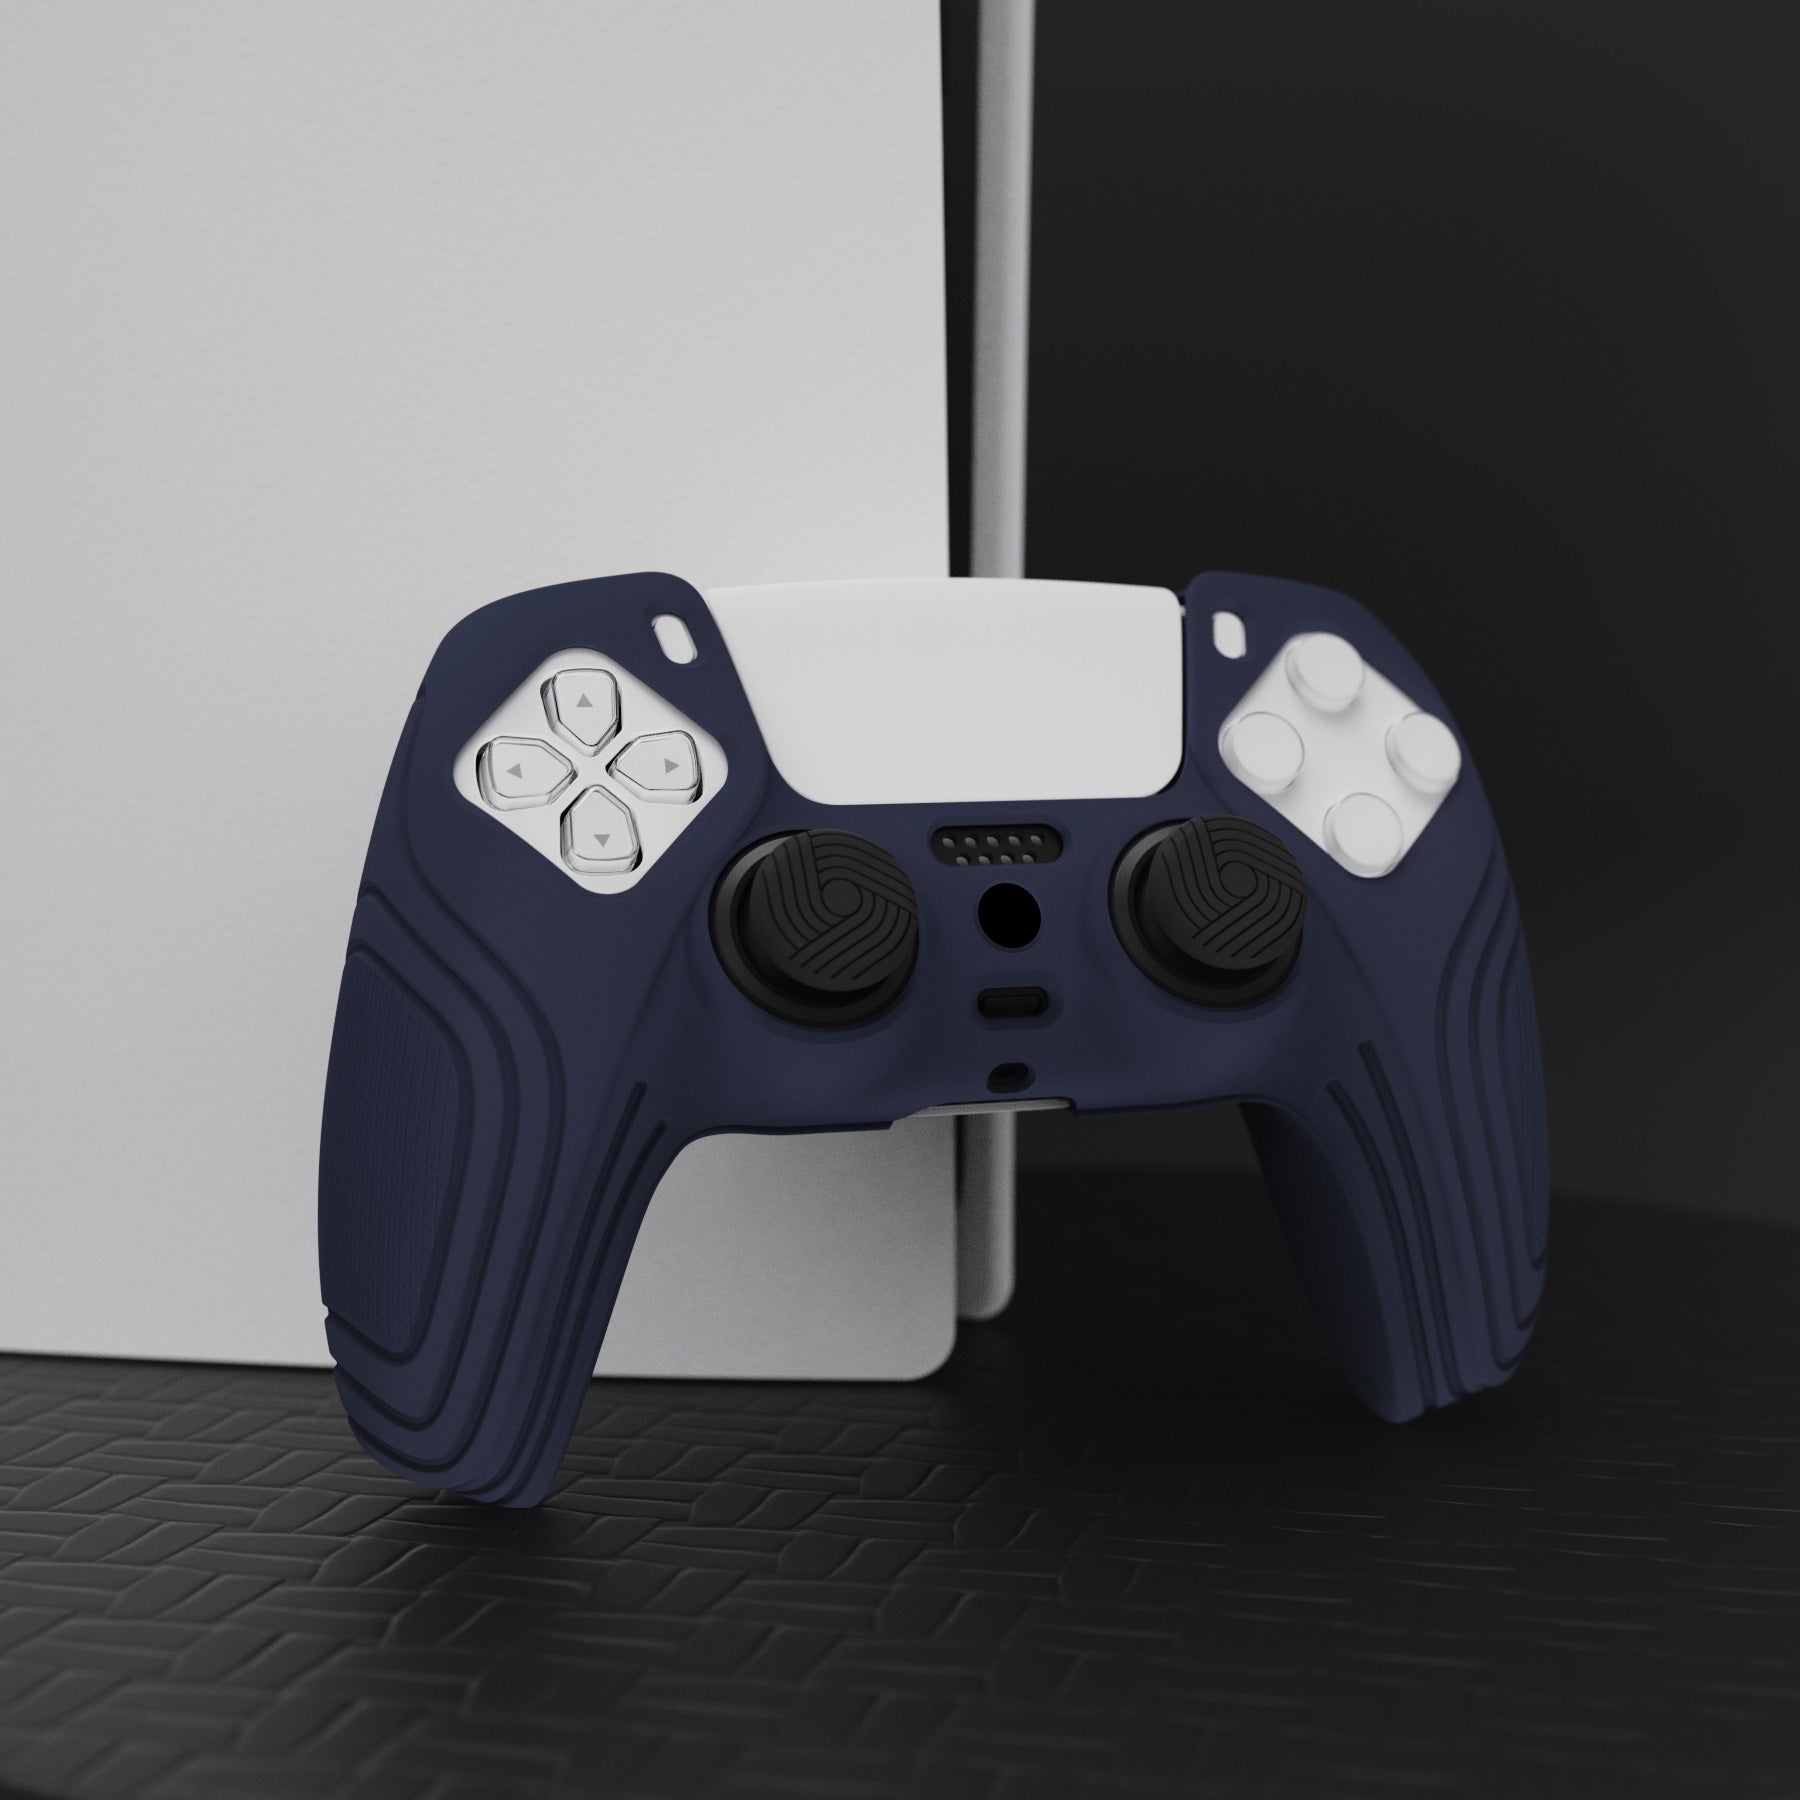 PlayVital Samurai Edition Anti-Slip Silicone Cover Skin with Thumb Grip Caps for PS5 Wireless Controller - Midnight Blue - BWPF003 PlayVital